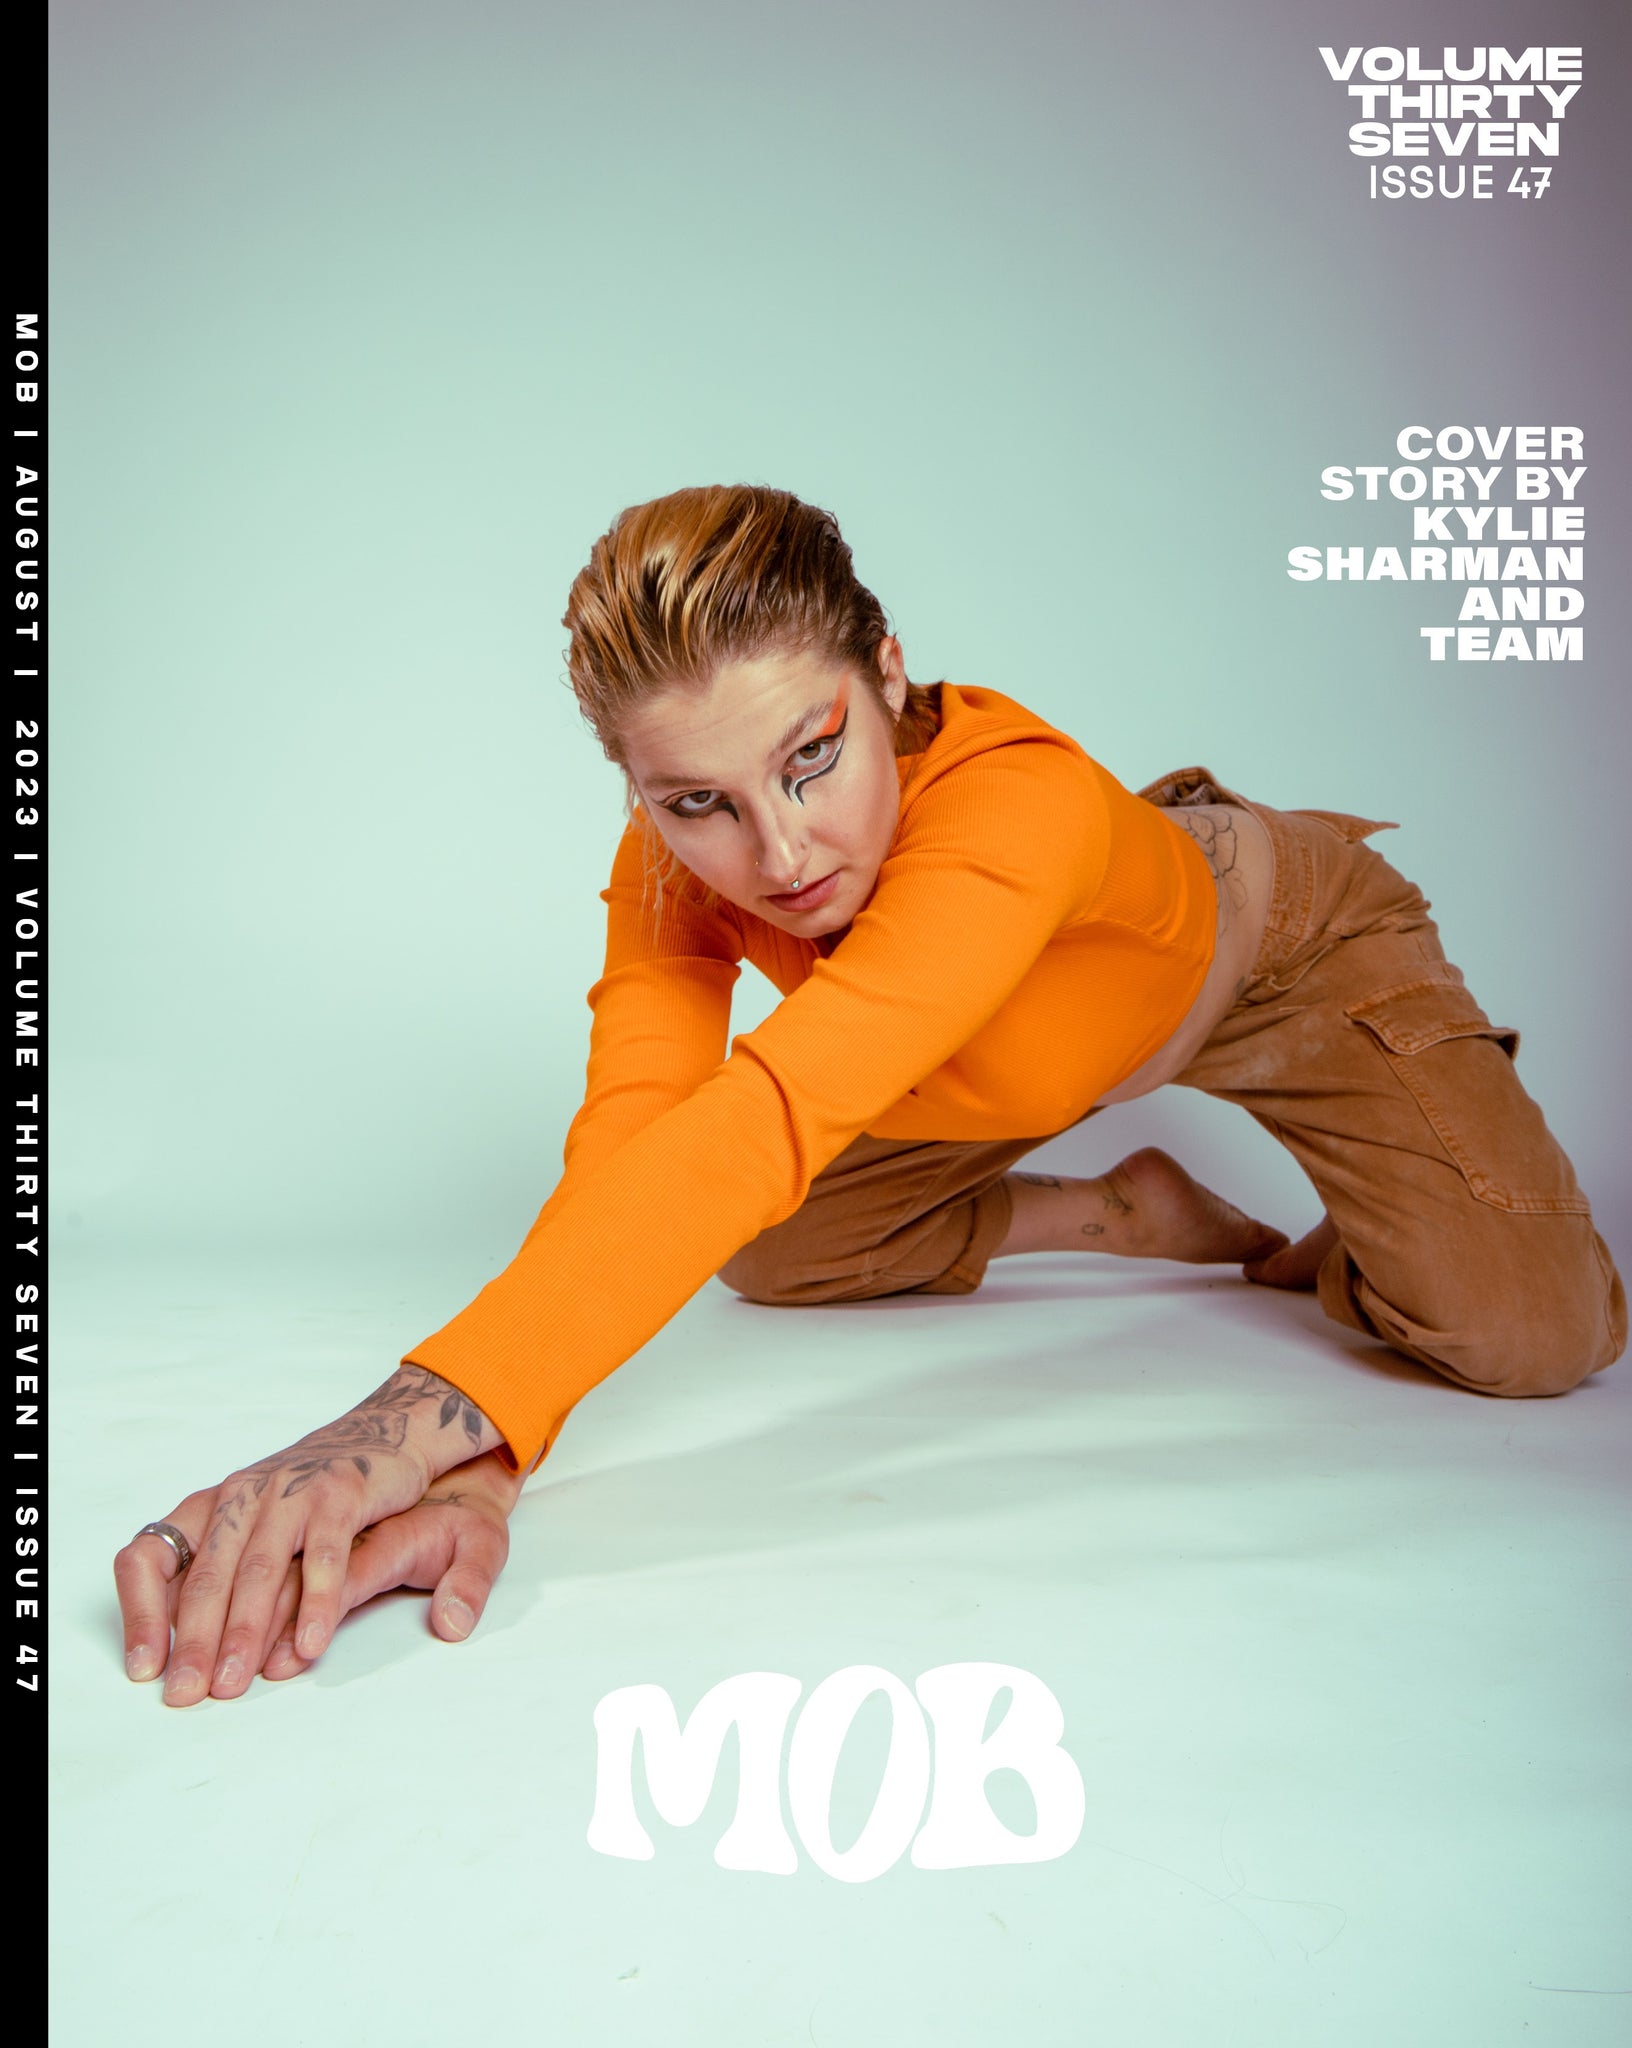 MOB JOURNAL | VOLUME THIRTY SEVEN | ISSUE #47